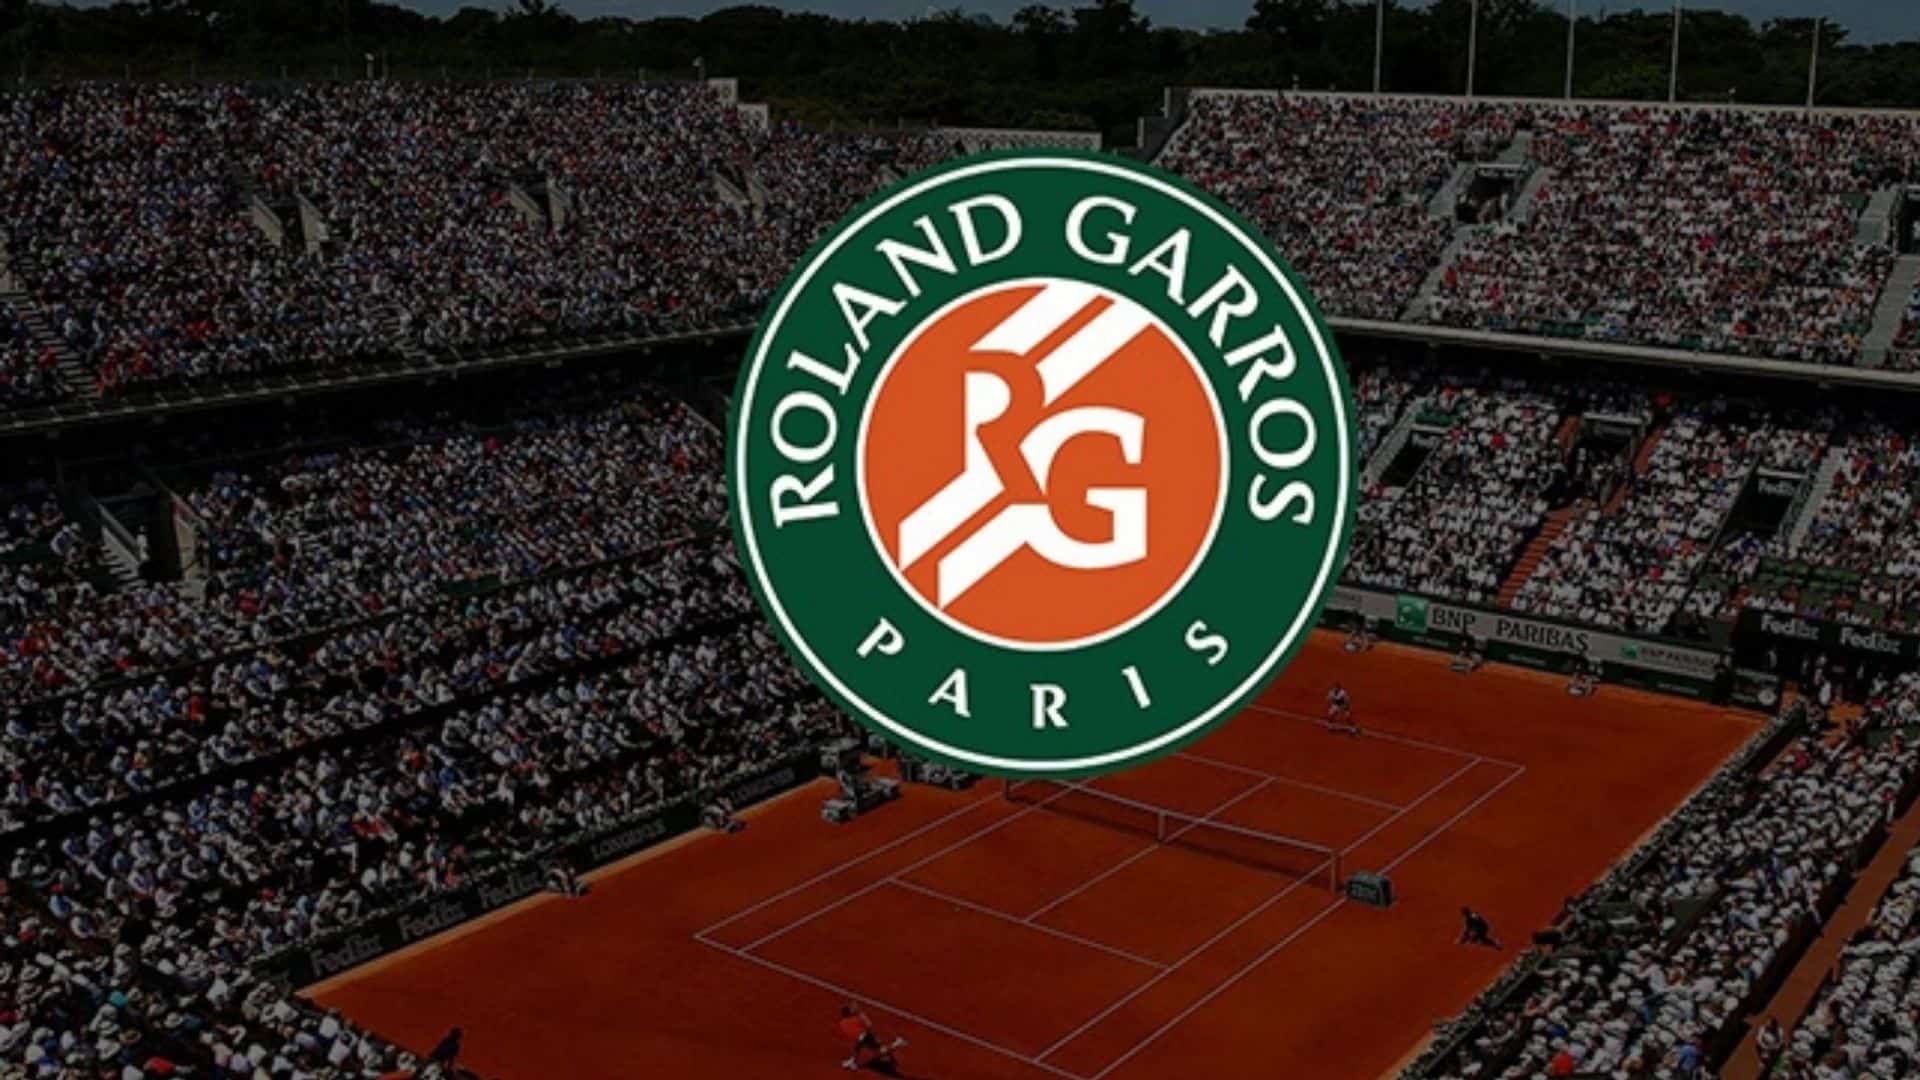 French Open 2021, delayed by a week, will start on May 30.